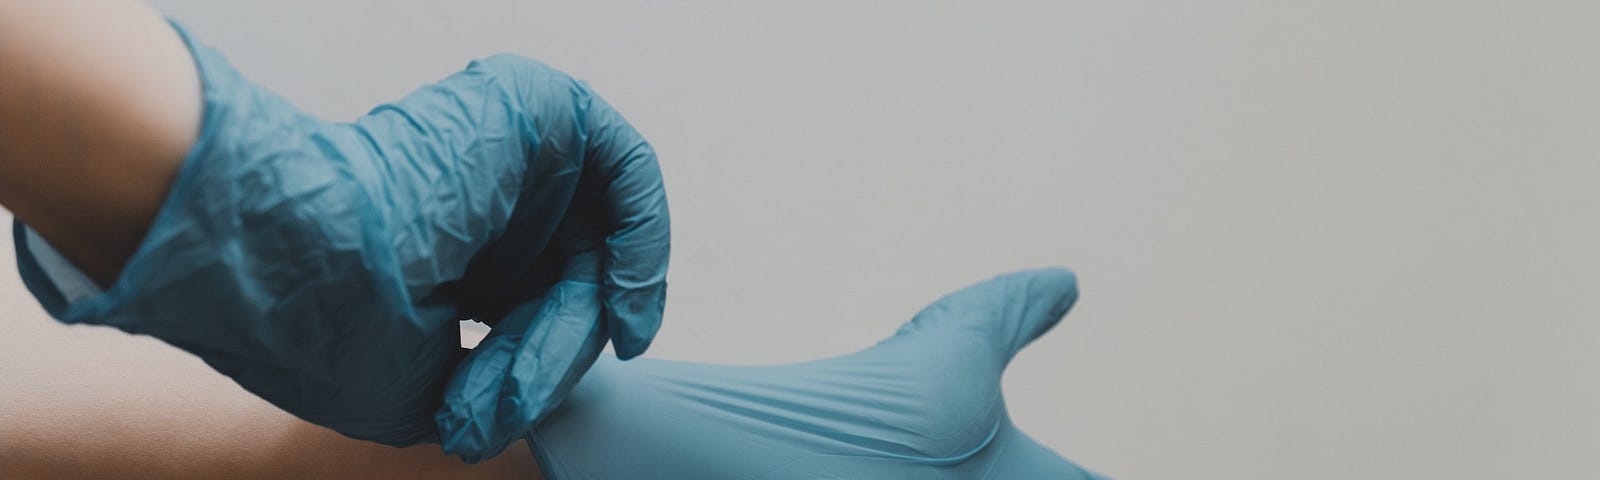 A pair of hands wearing blue medical gloves